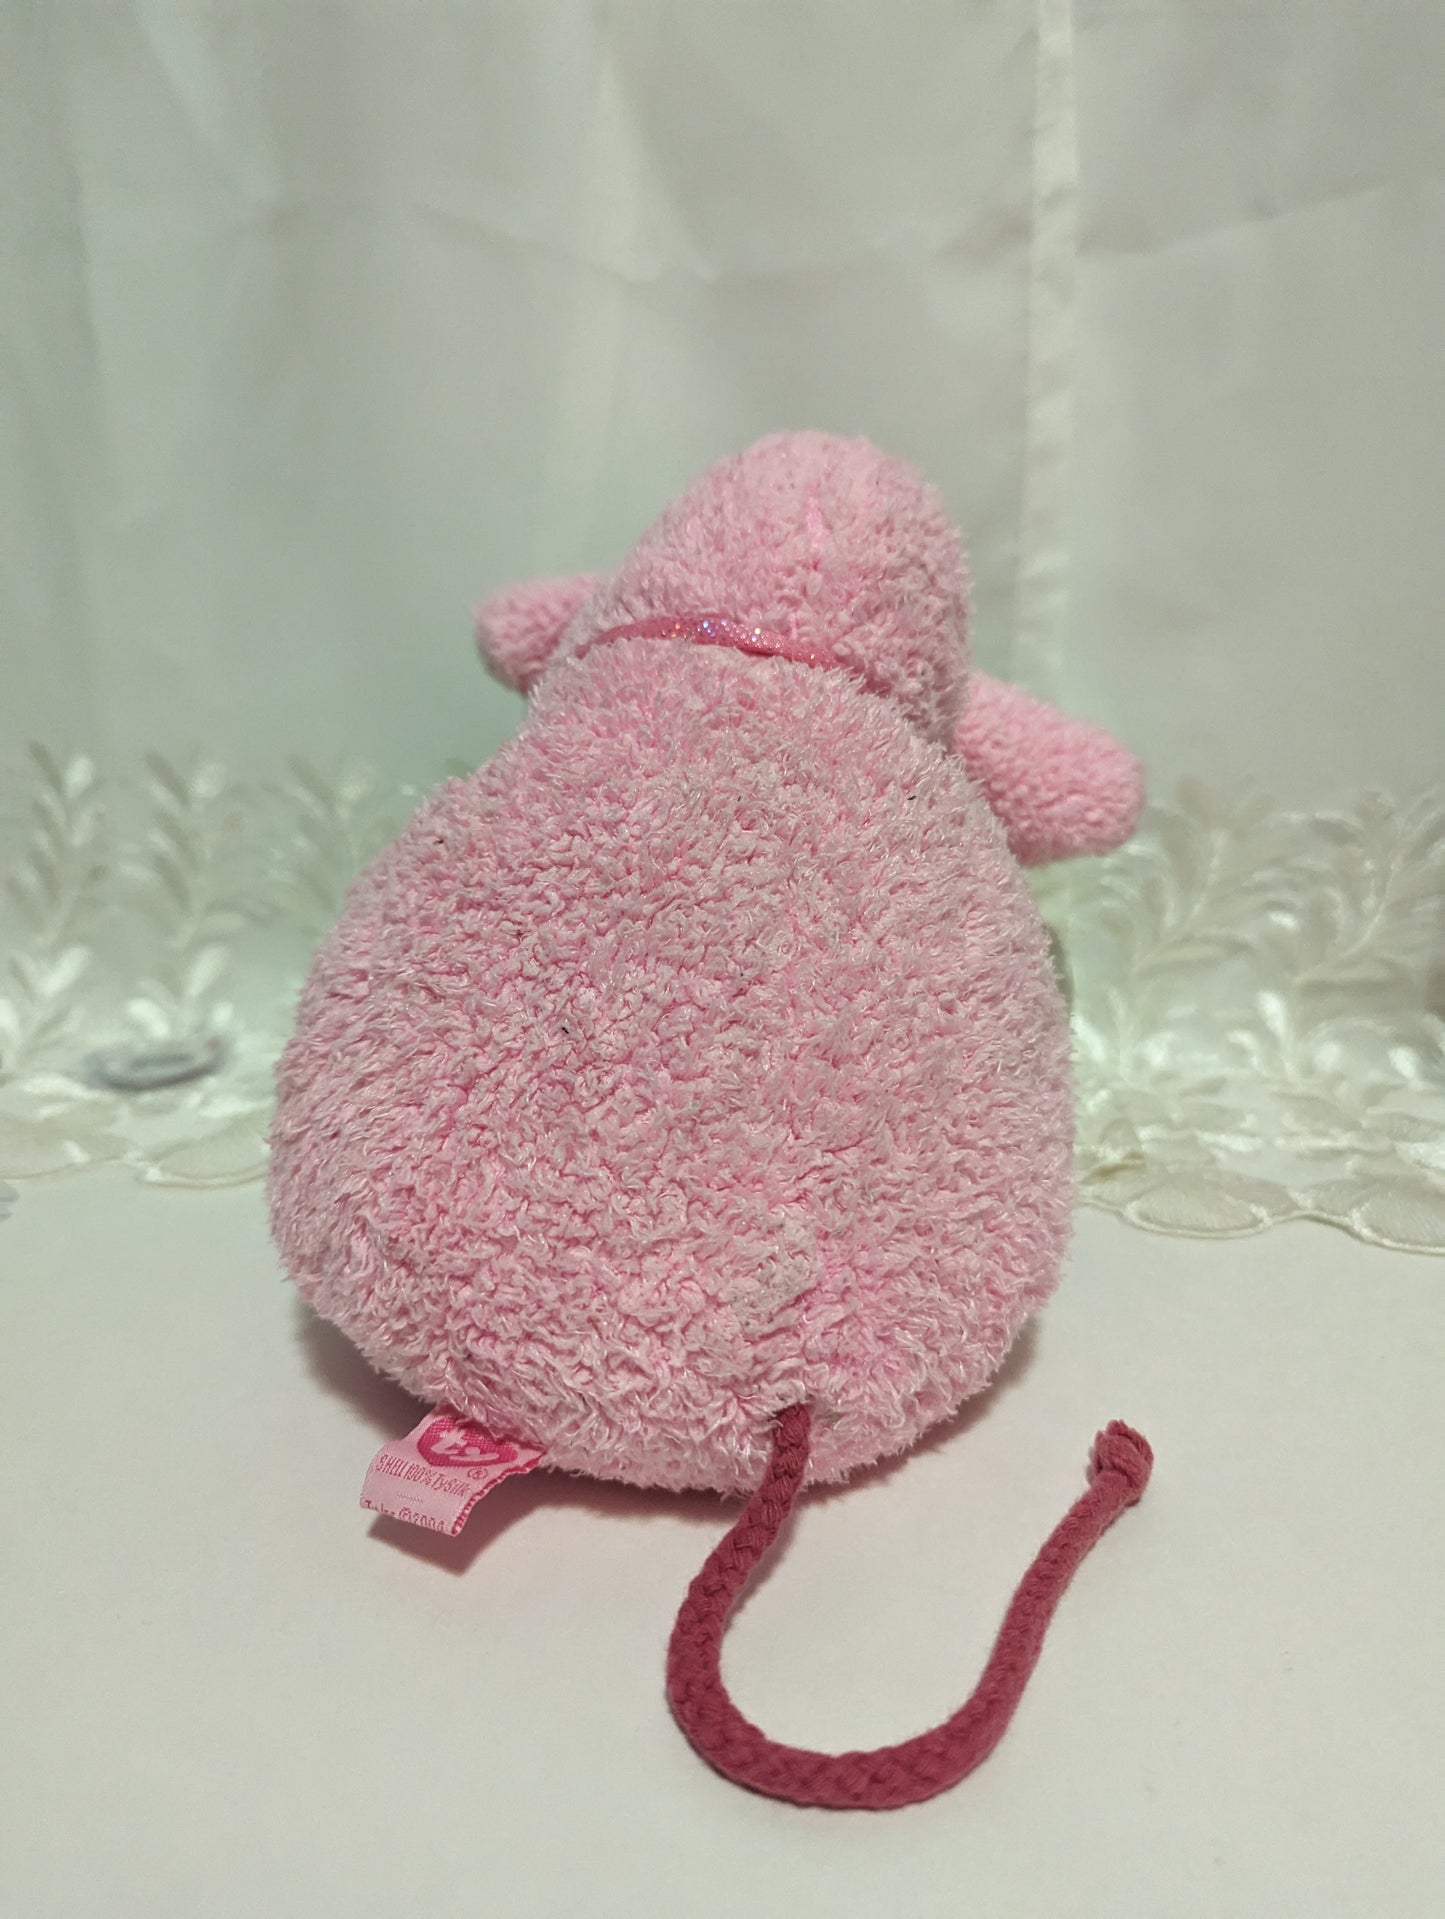 Ty Pinkys Beanie Buddy - Ratzo The Large Pink Rat (13in) Non-mint Hang Tag - Vintage Beanies Canada